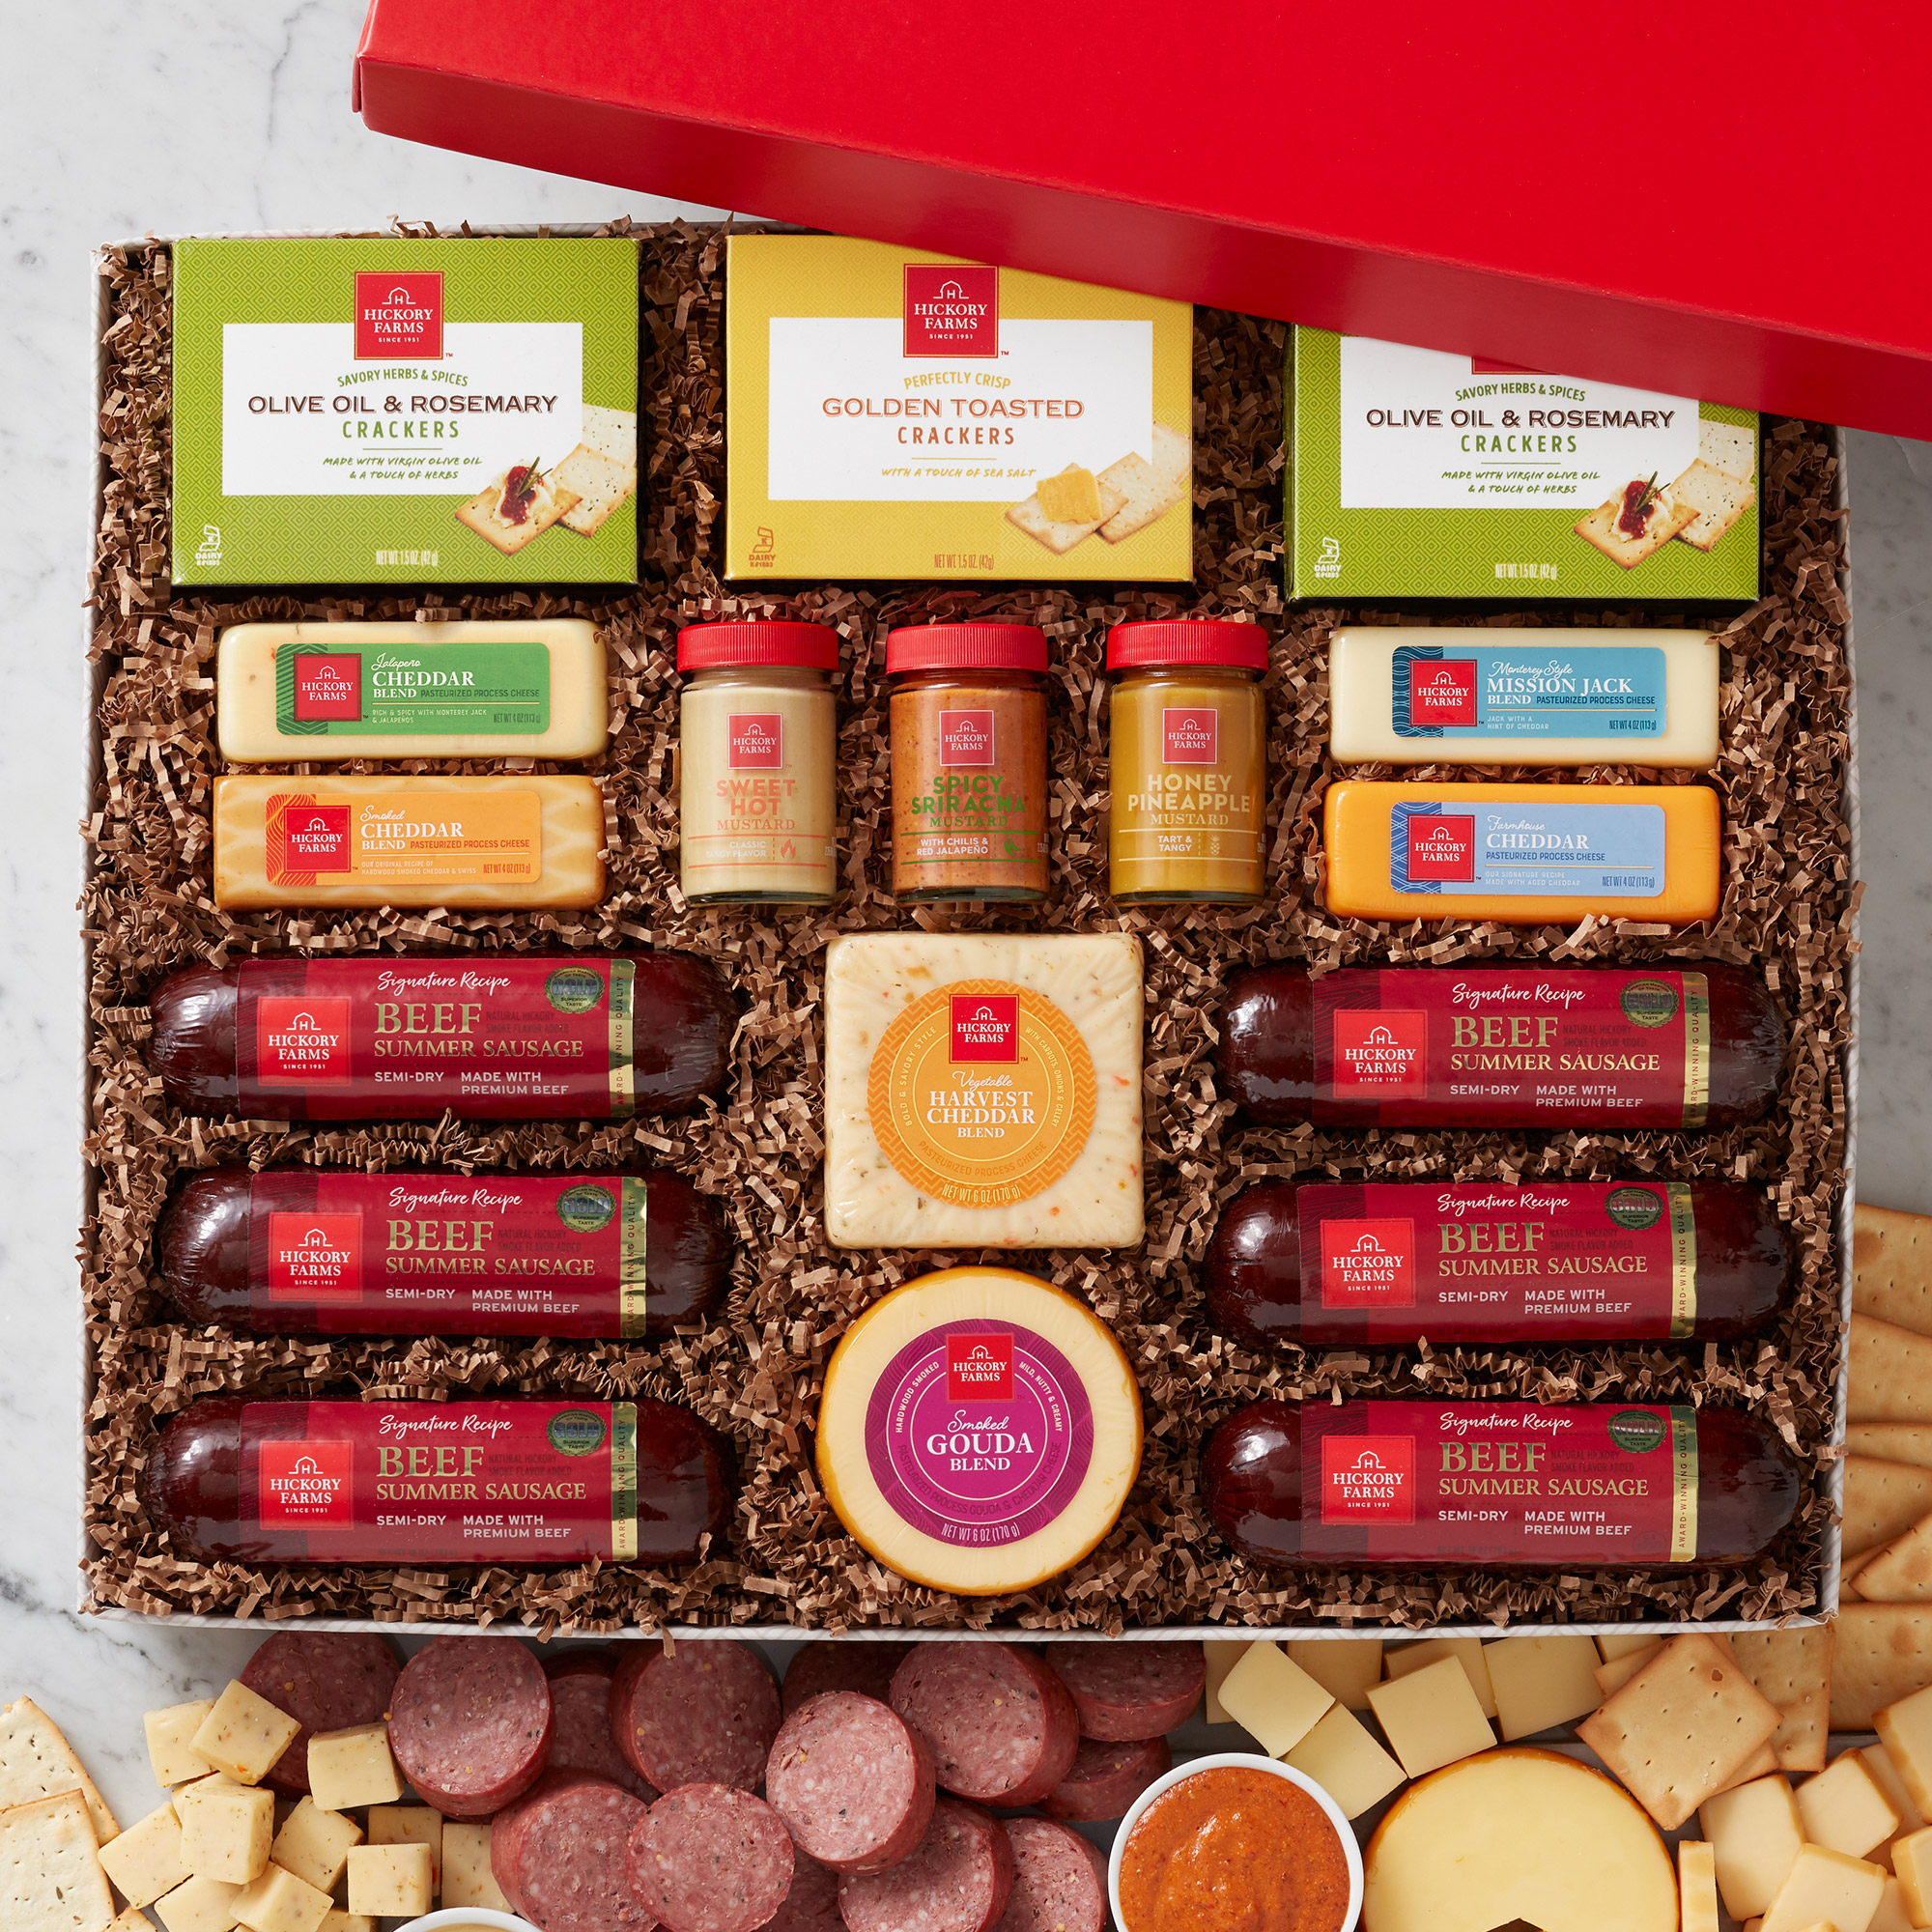 Hickory Farms - This Summer Sausage and Cheese Gift Box